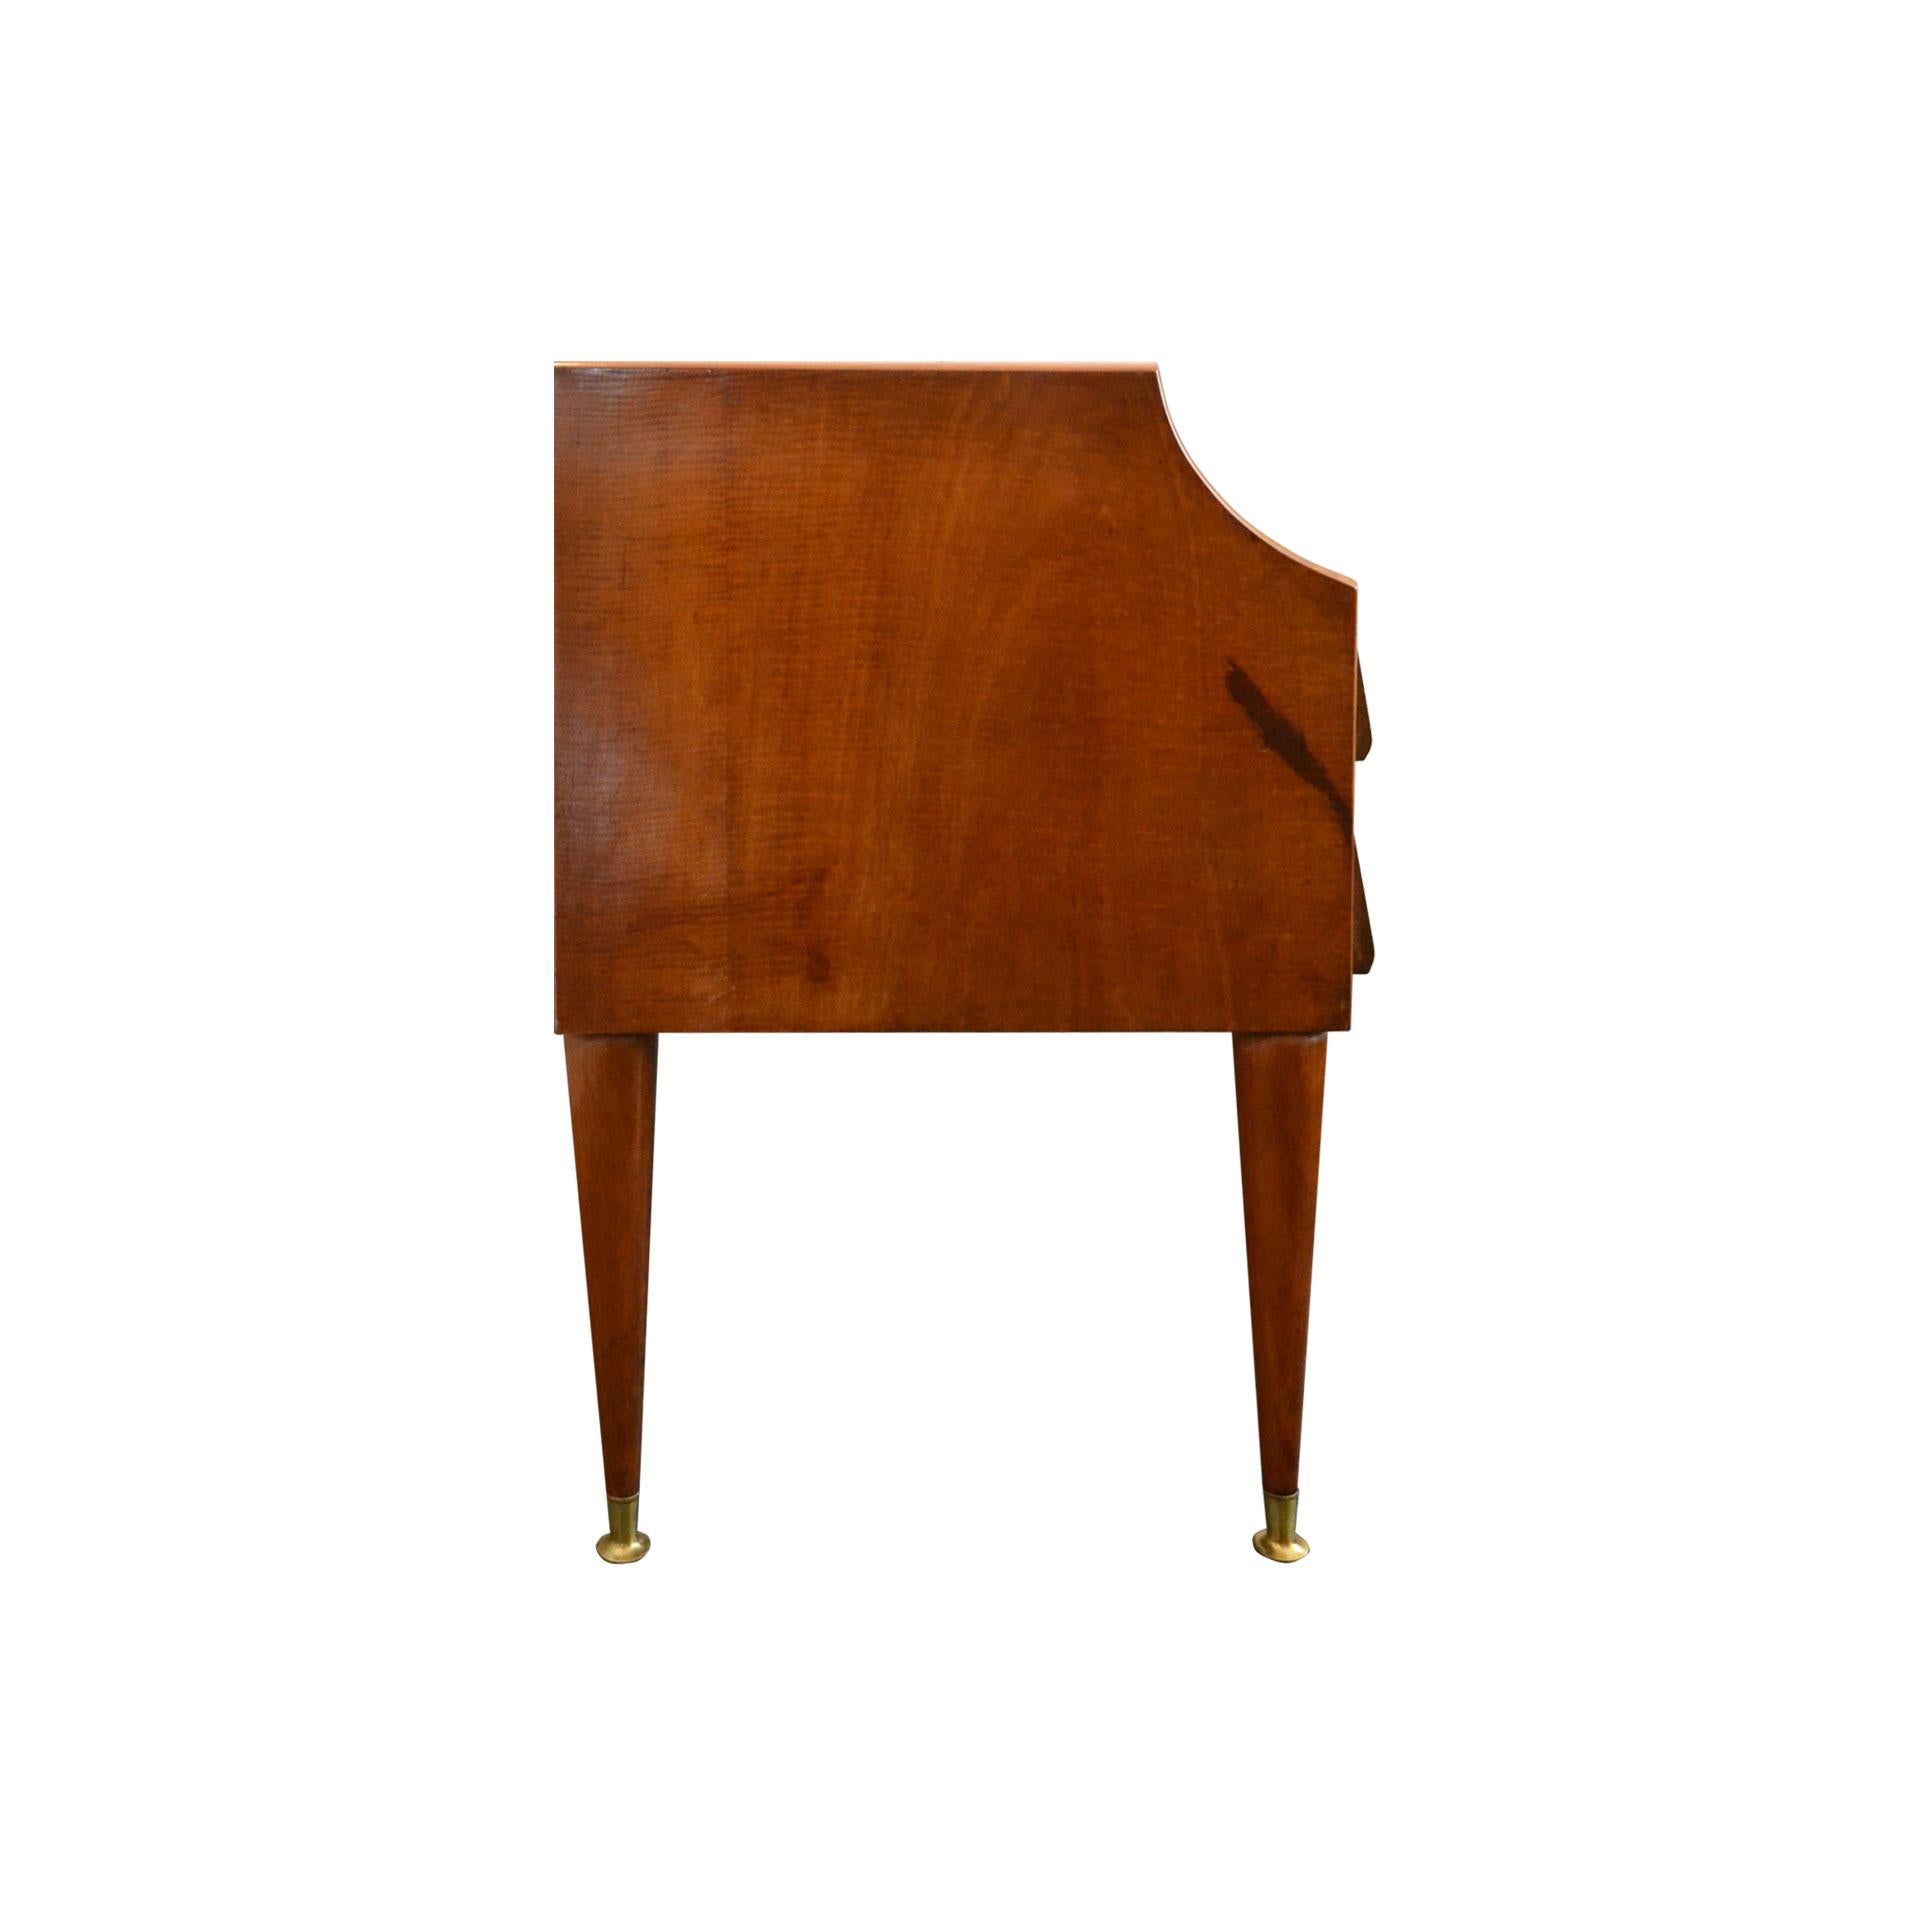 Italian 20th Century Sideboard in the Style of Gio Ponti in Wood and Brass